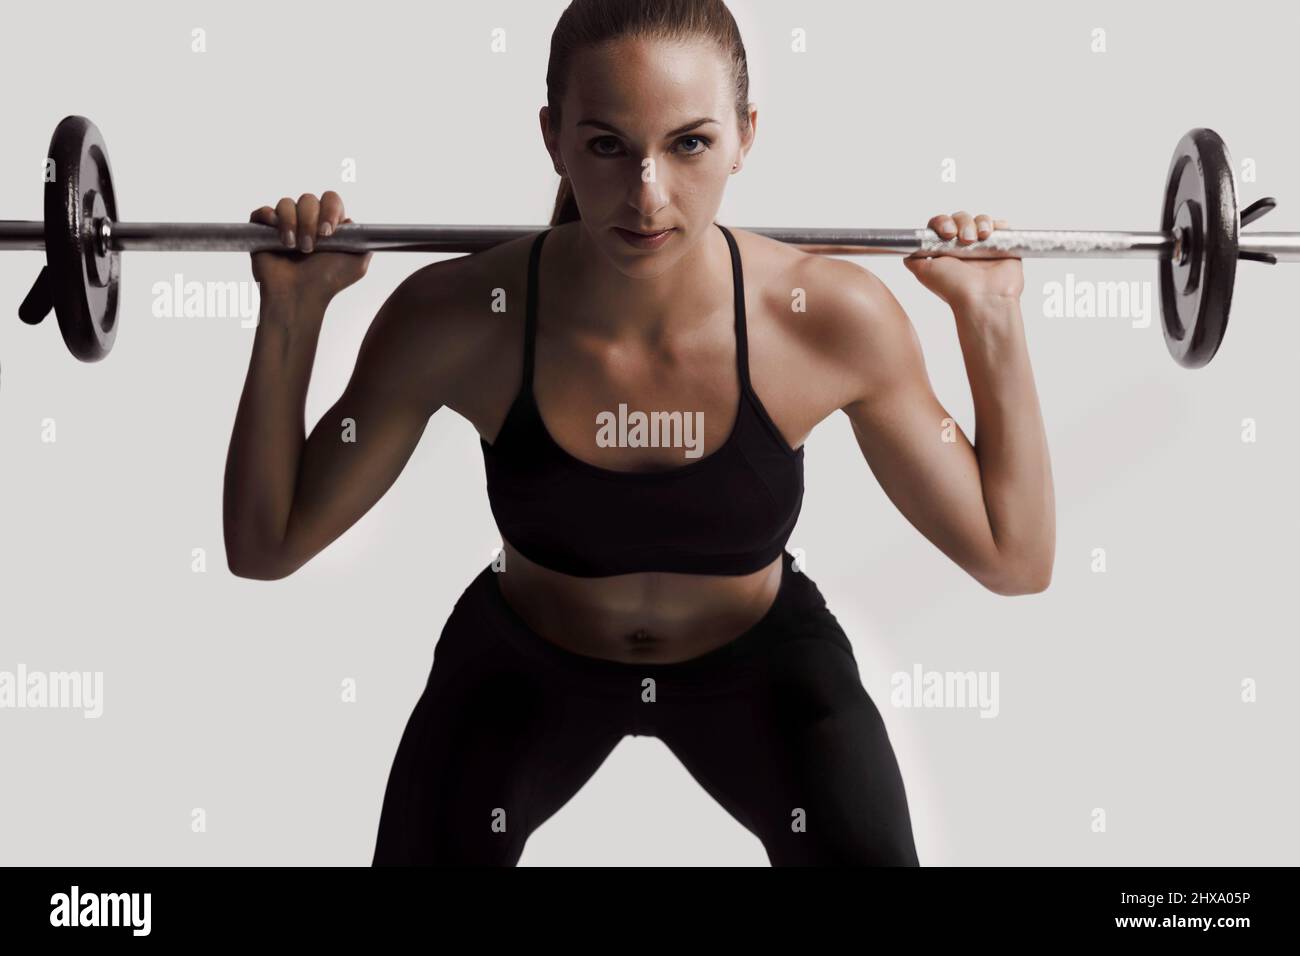 Tough young woman exercising with barbell. Determined female athlete  lifting heavy weights Stock Photo - Alamy